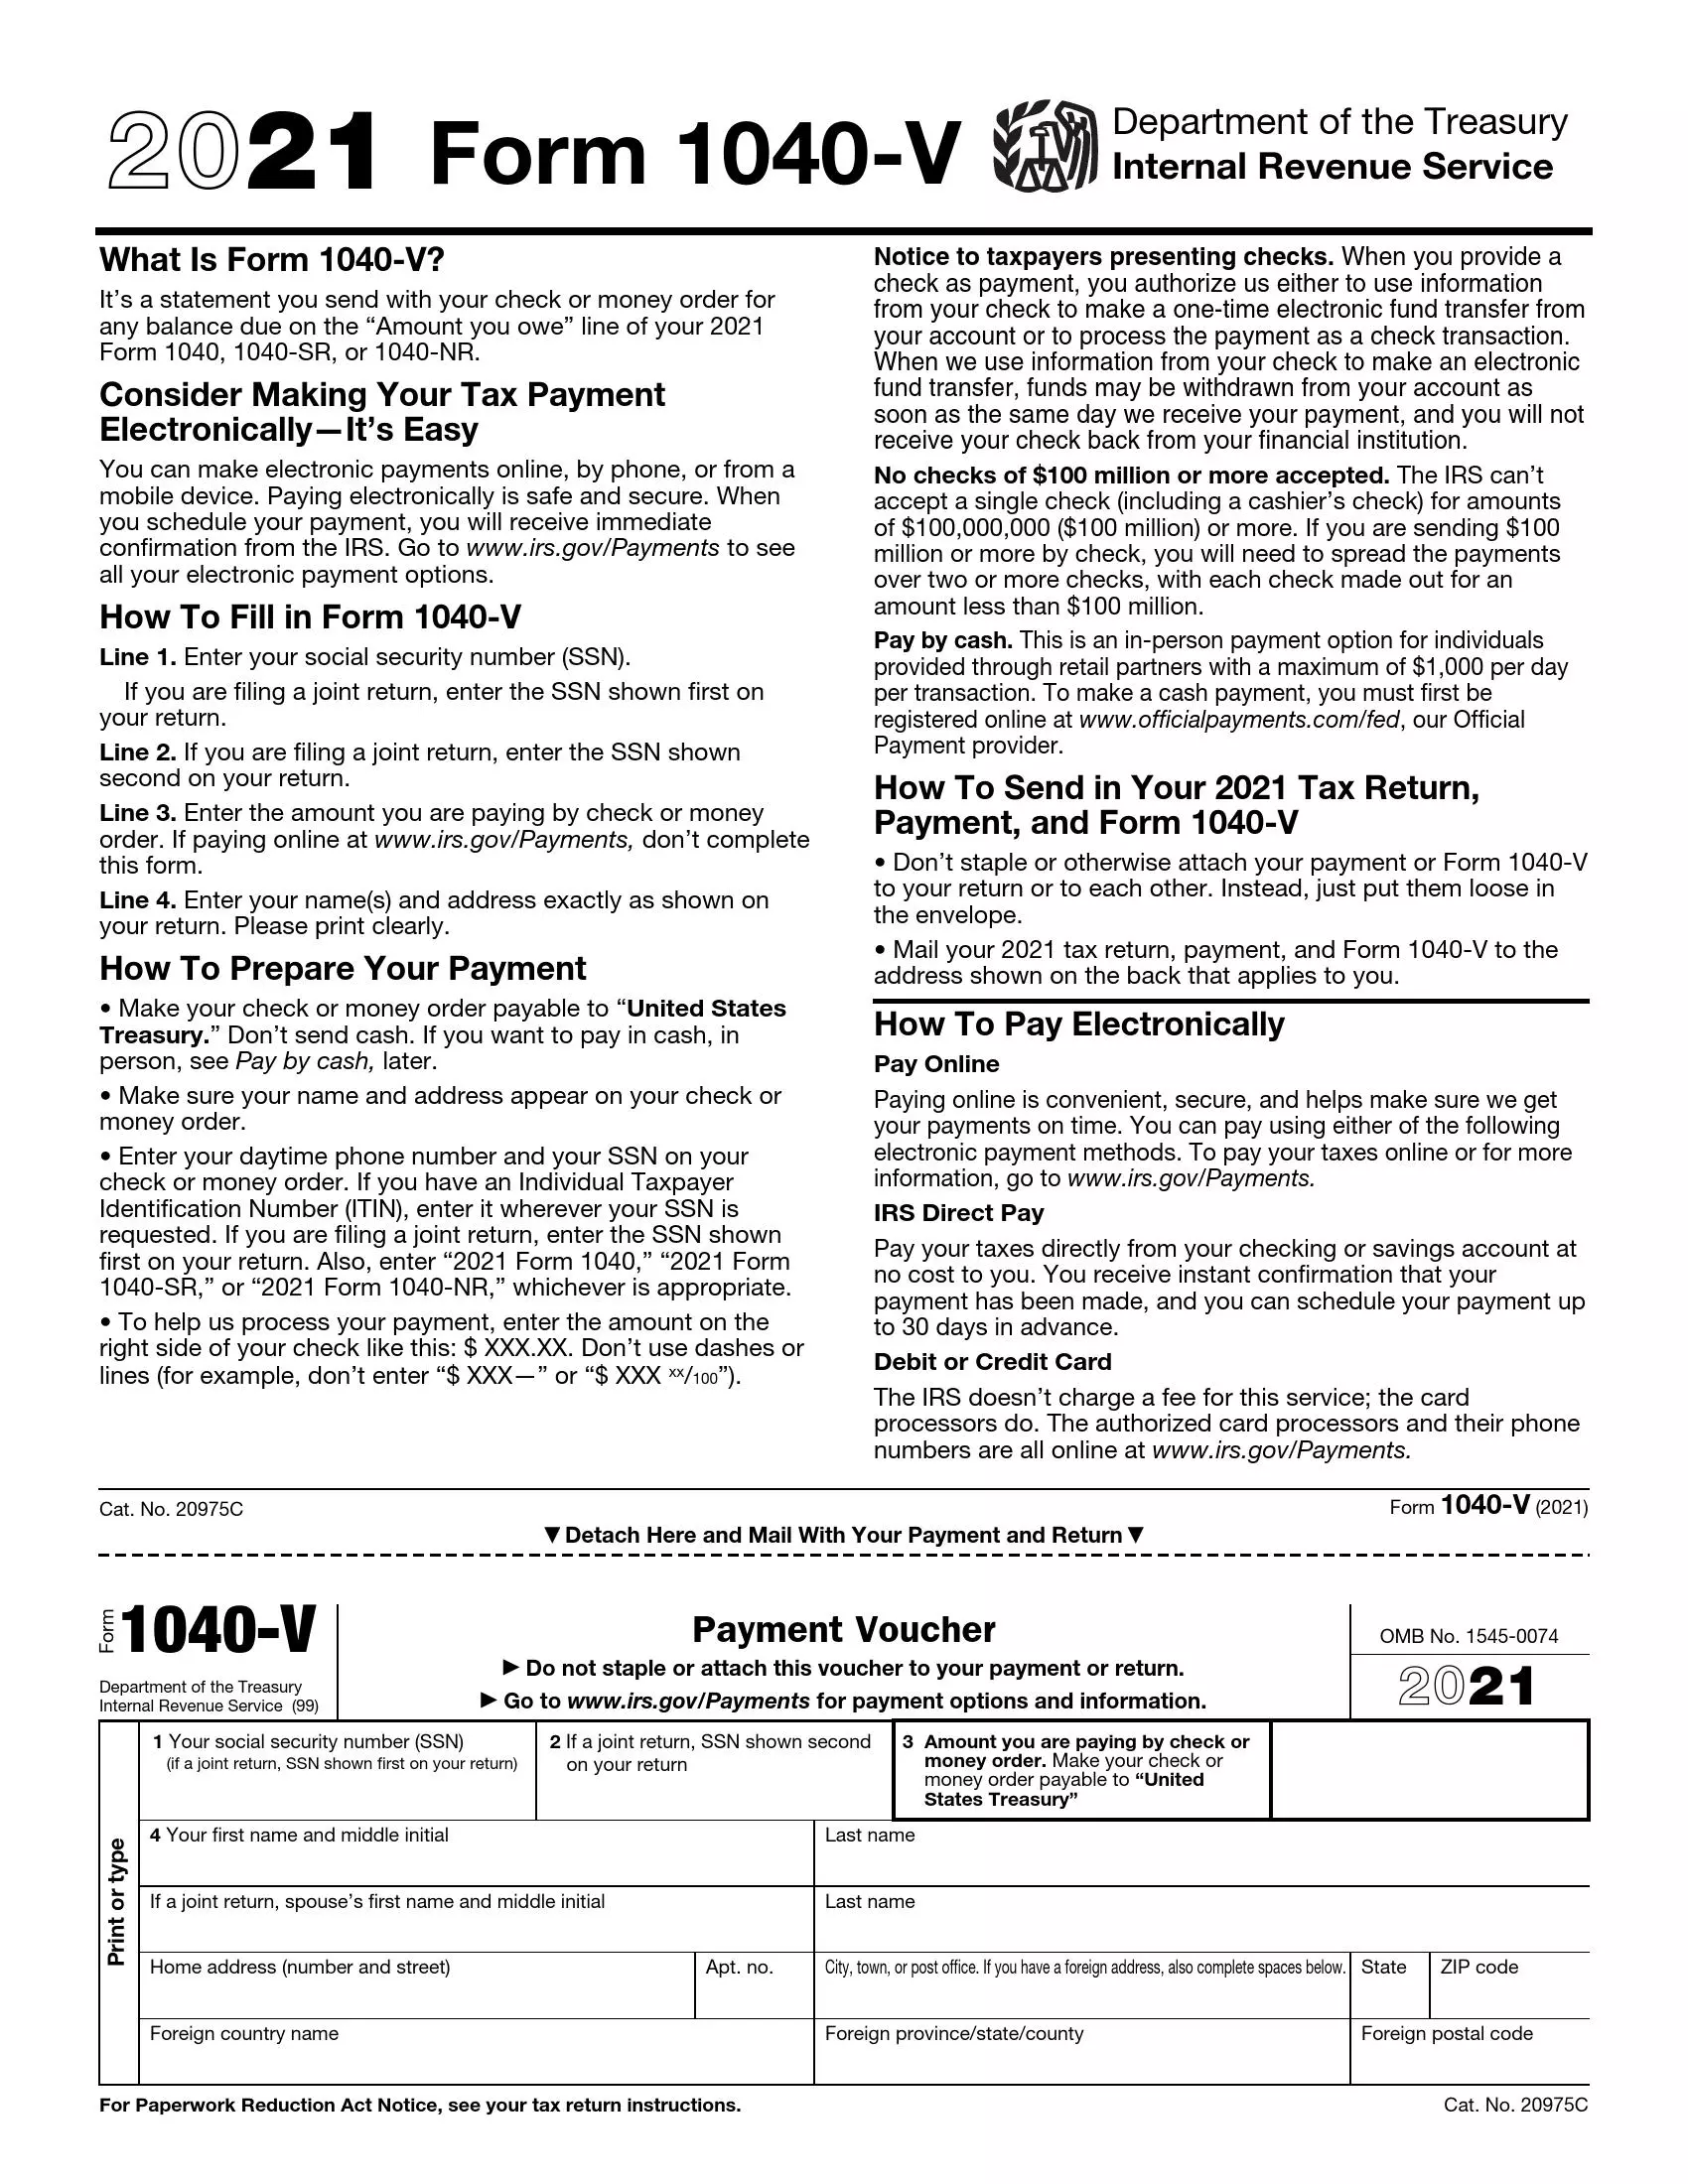 irs form 1040 v 2021 preview